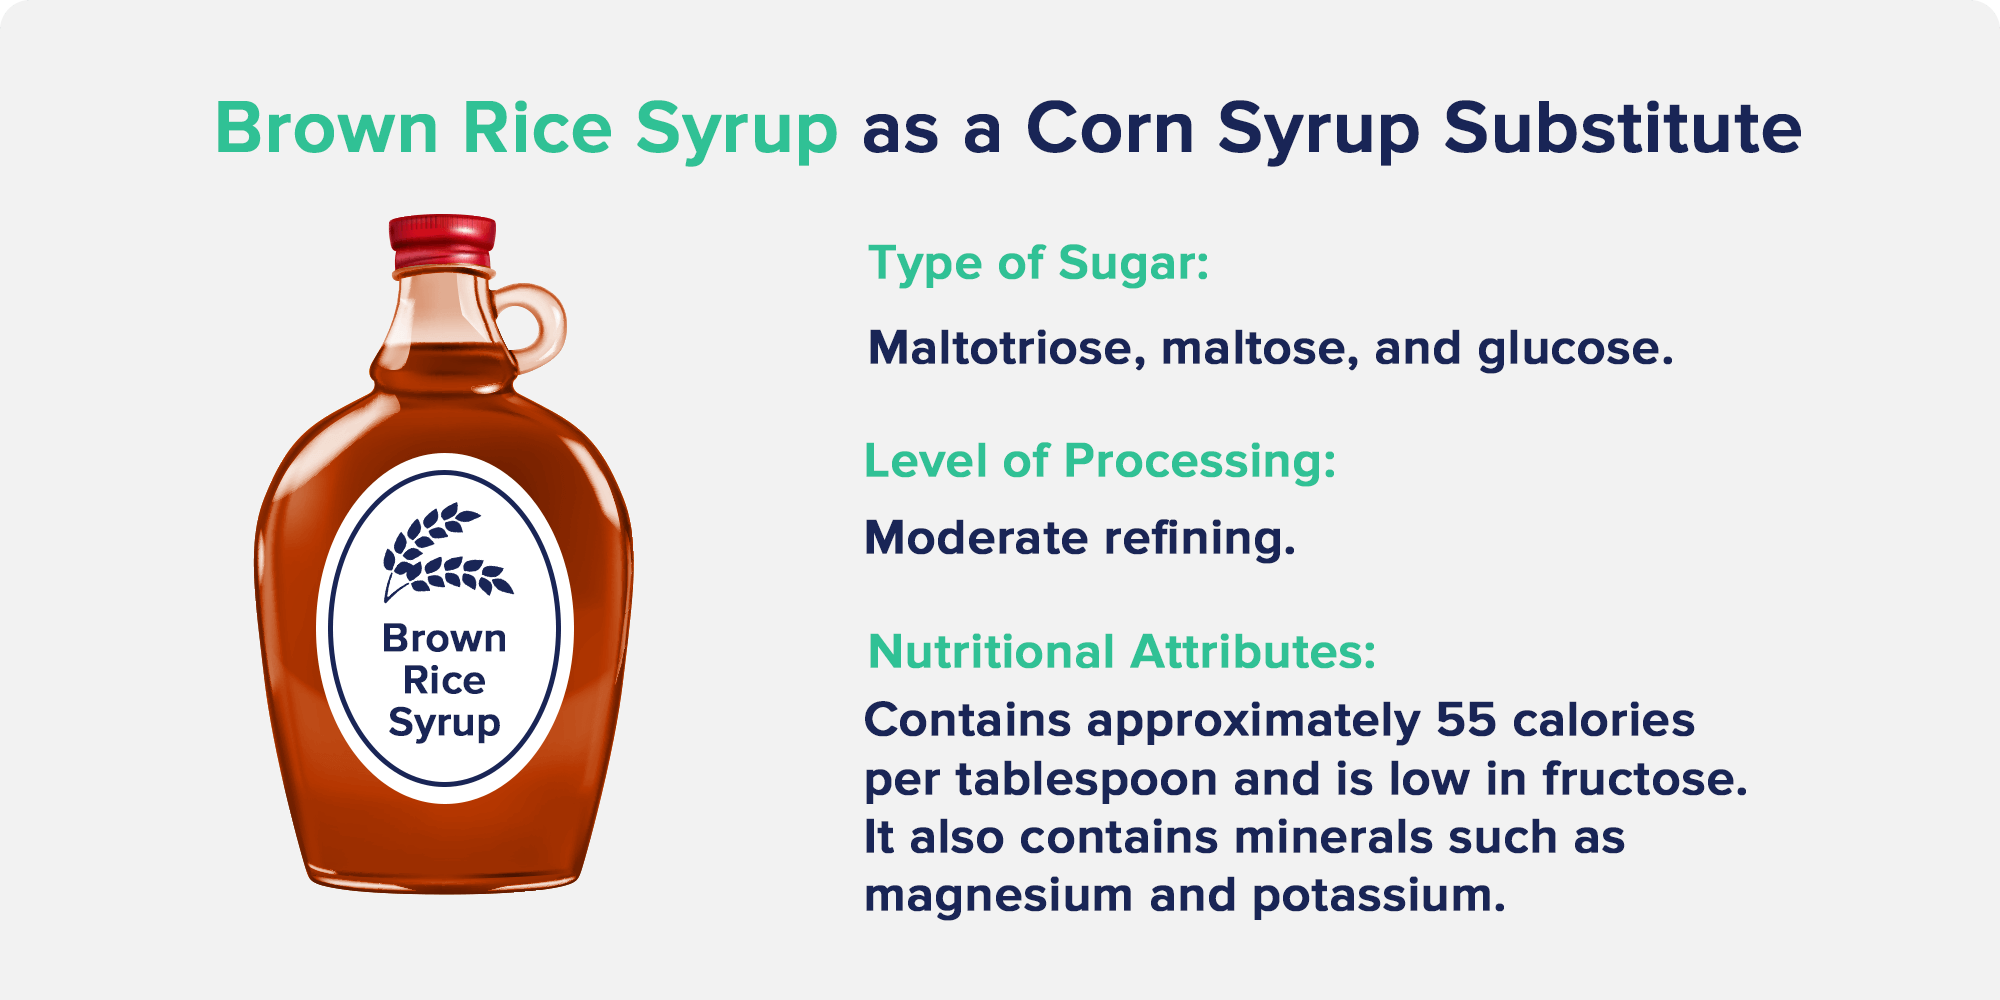 Brown Rice Syrup as a Corn Syrup Substitute